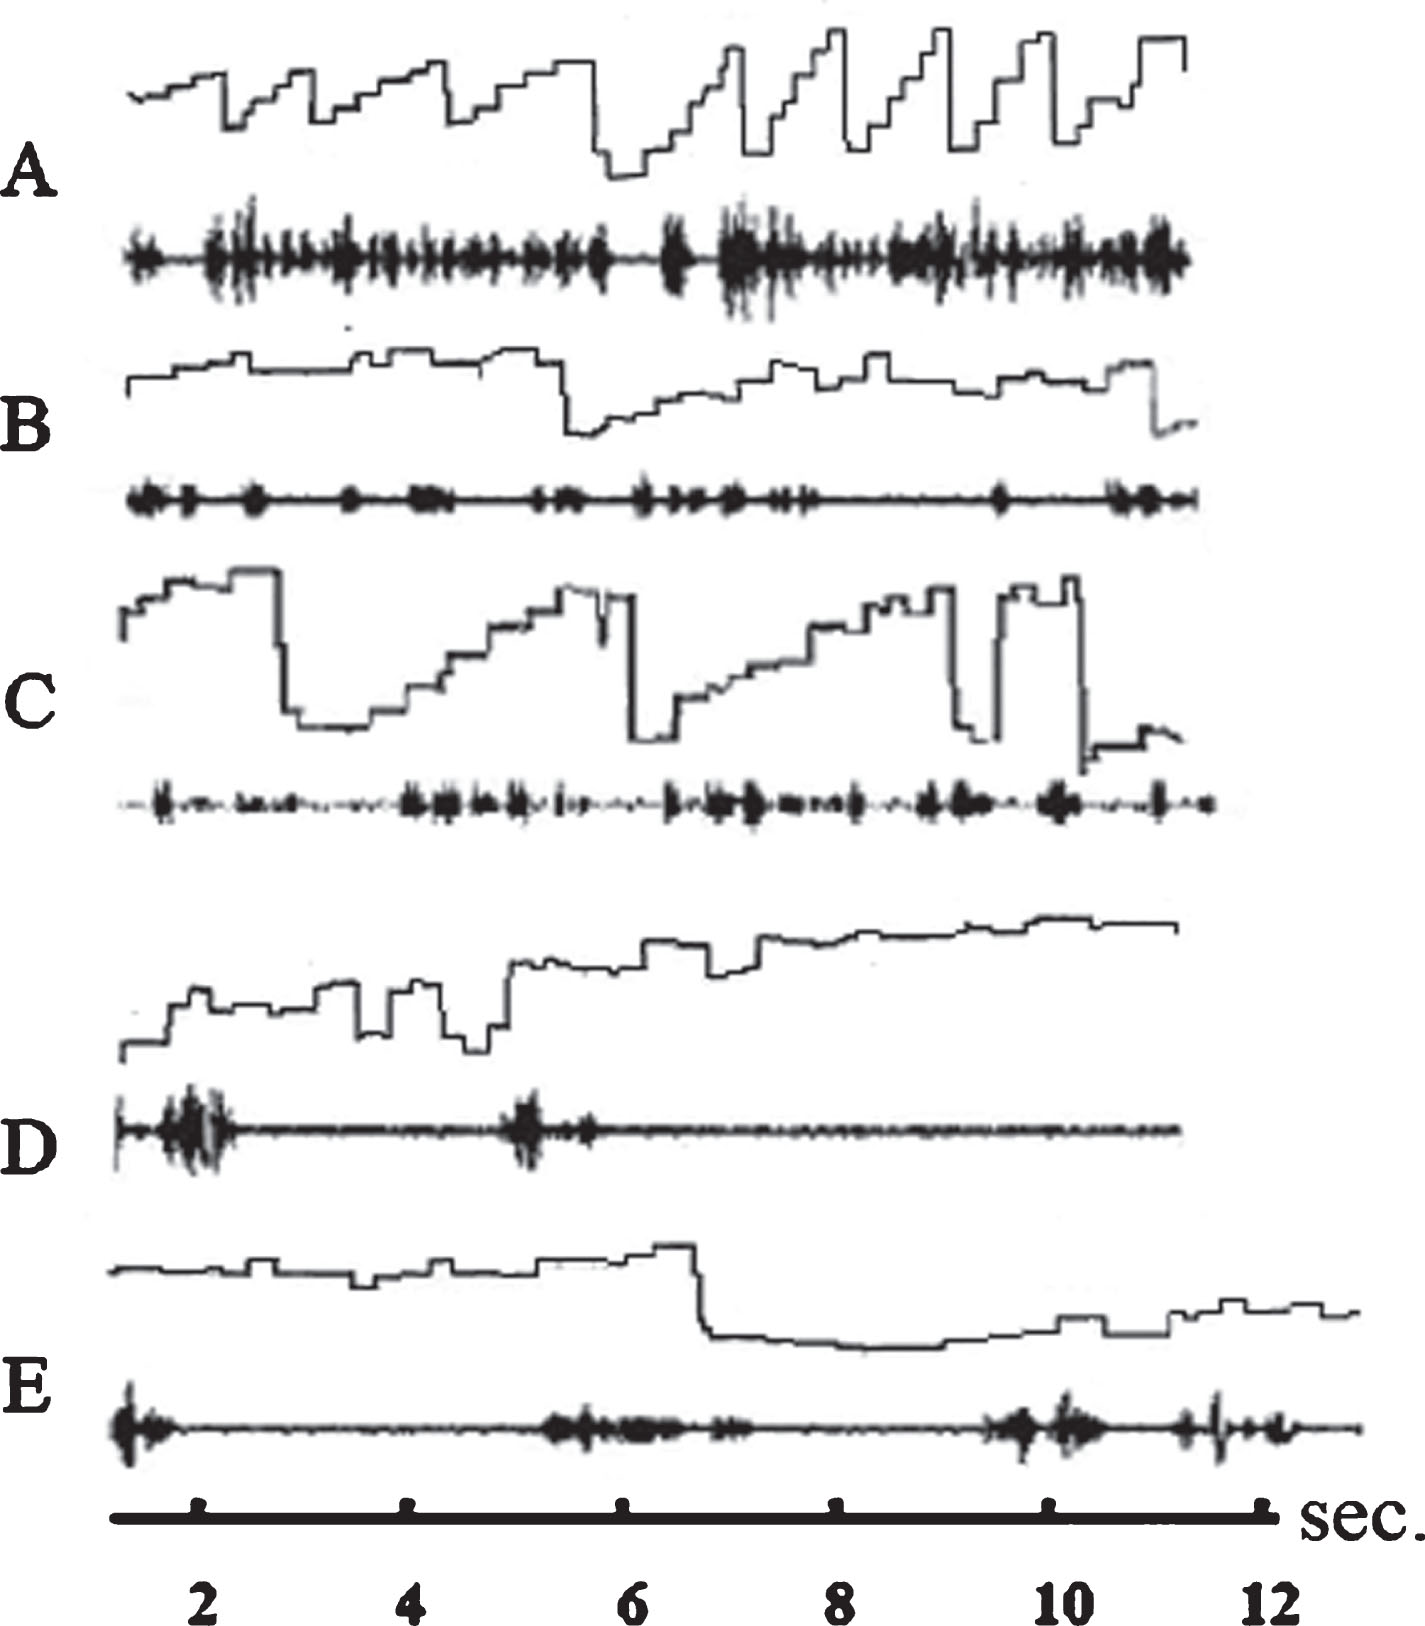 Eye movements and speech recording of three subjects while reading a text from the ZLT. Abscissa: time axis; ordinate: amplitude of eye movements. Ascending line: eye movement to the right; descending line: eye movement to the left. The spectrogram of the reader’s language is displayed below each graphic representation of eye movements. A: ideal staircase eye movements of a good reader (not included in the study). B: eye movements and speech spectrogram of a dyslexic reader before therapy. The subject is reading slowly with only few staircase-like eye movements and many eye movements against the reading direction (reversions). C: eye movements and speech spectrogram of the same subject after therapy. Sequences during which the subject performs staircase-like eye movements are more frequent than before therapy but there are still many reversions. D: eye movements and speech spectrogram of a dyslexic subject who is reading very slowly. The subject speaks only after having performed a series of searching eye movements. E: The subject performs more staircase-like eye movements but executes still many reversions. The speech is much more fluent. All subjects reduce reading mistakes after therapy by almost two thirds.